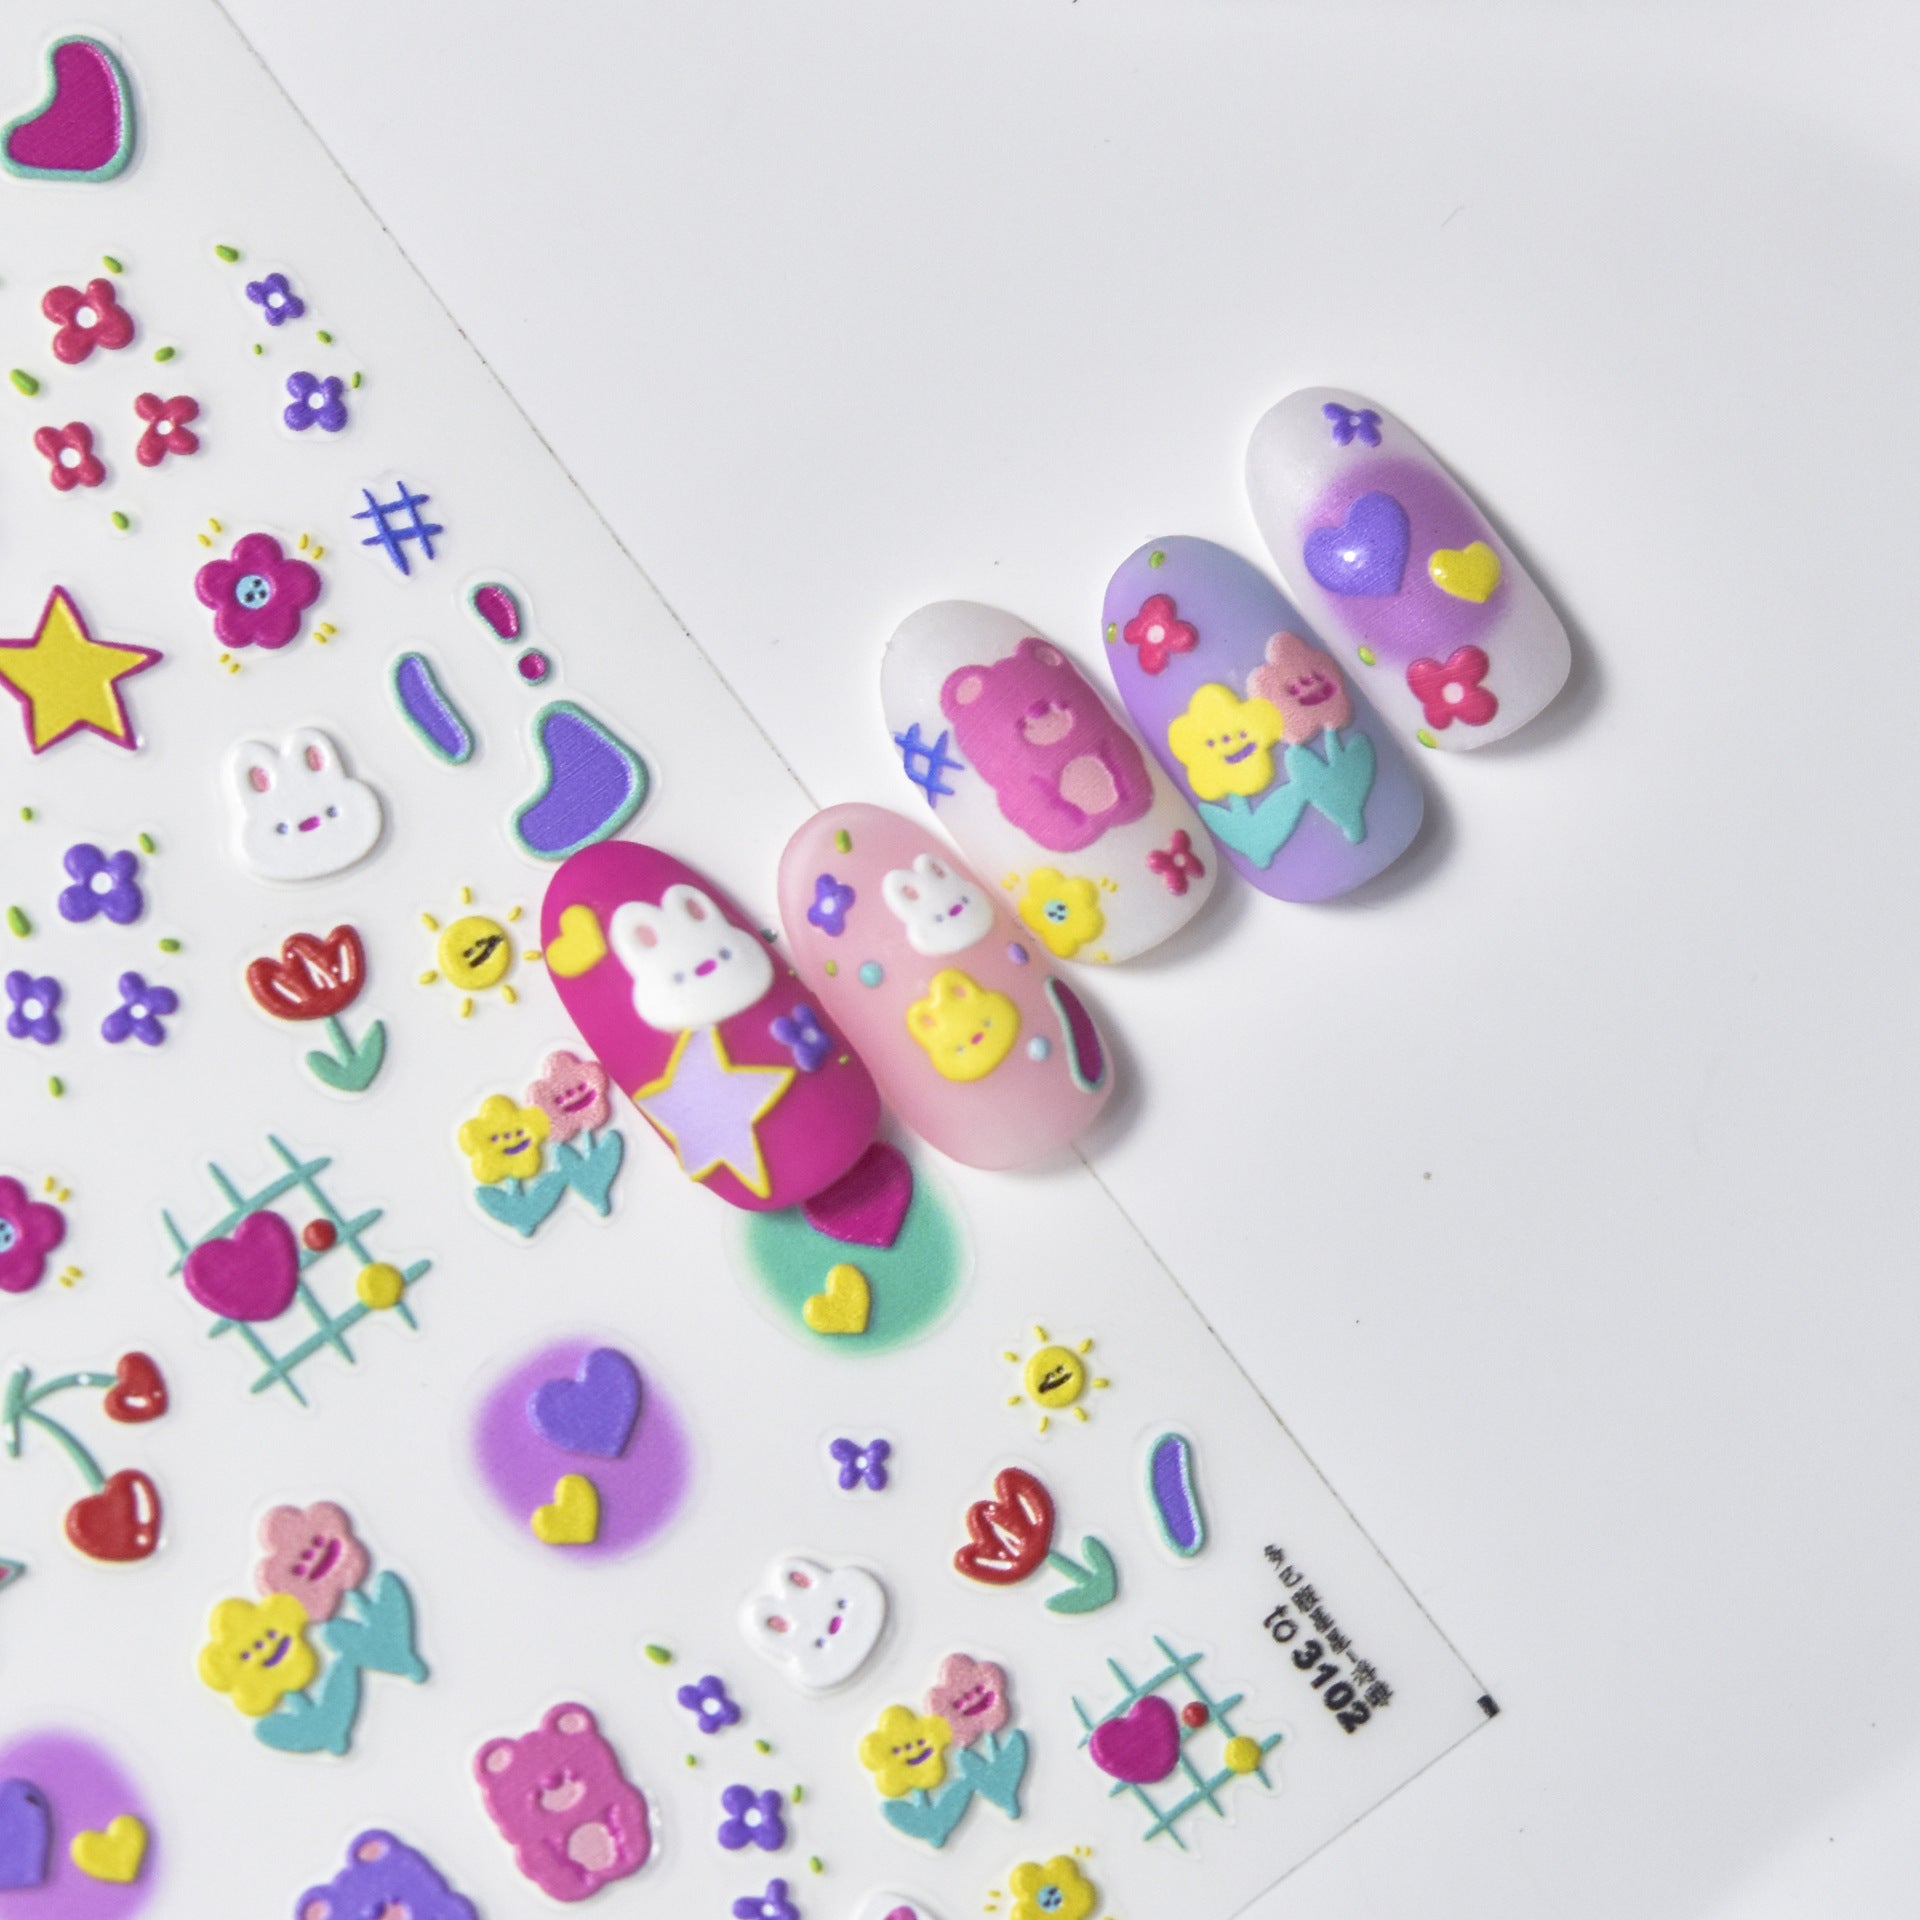 NailMAD Cow Print Nail Art Stickers Adhesive Embossed Cute Bear Bunny Flower Sticker Decals to3054